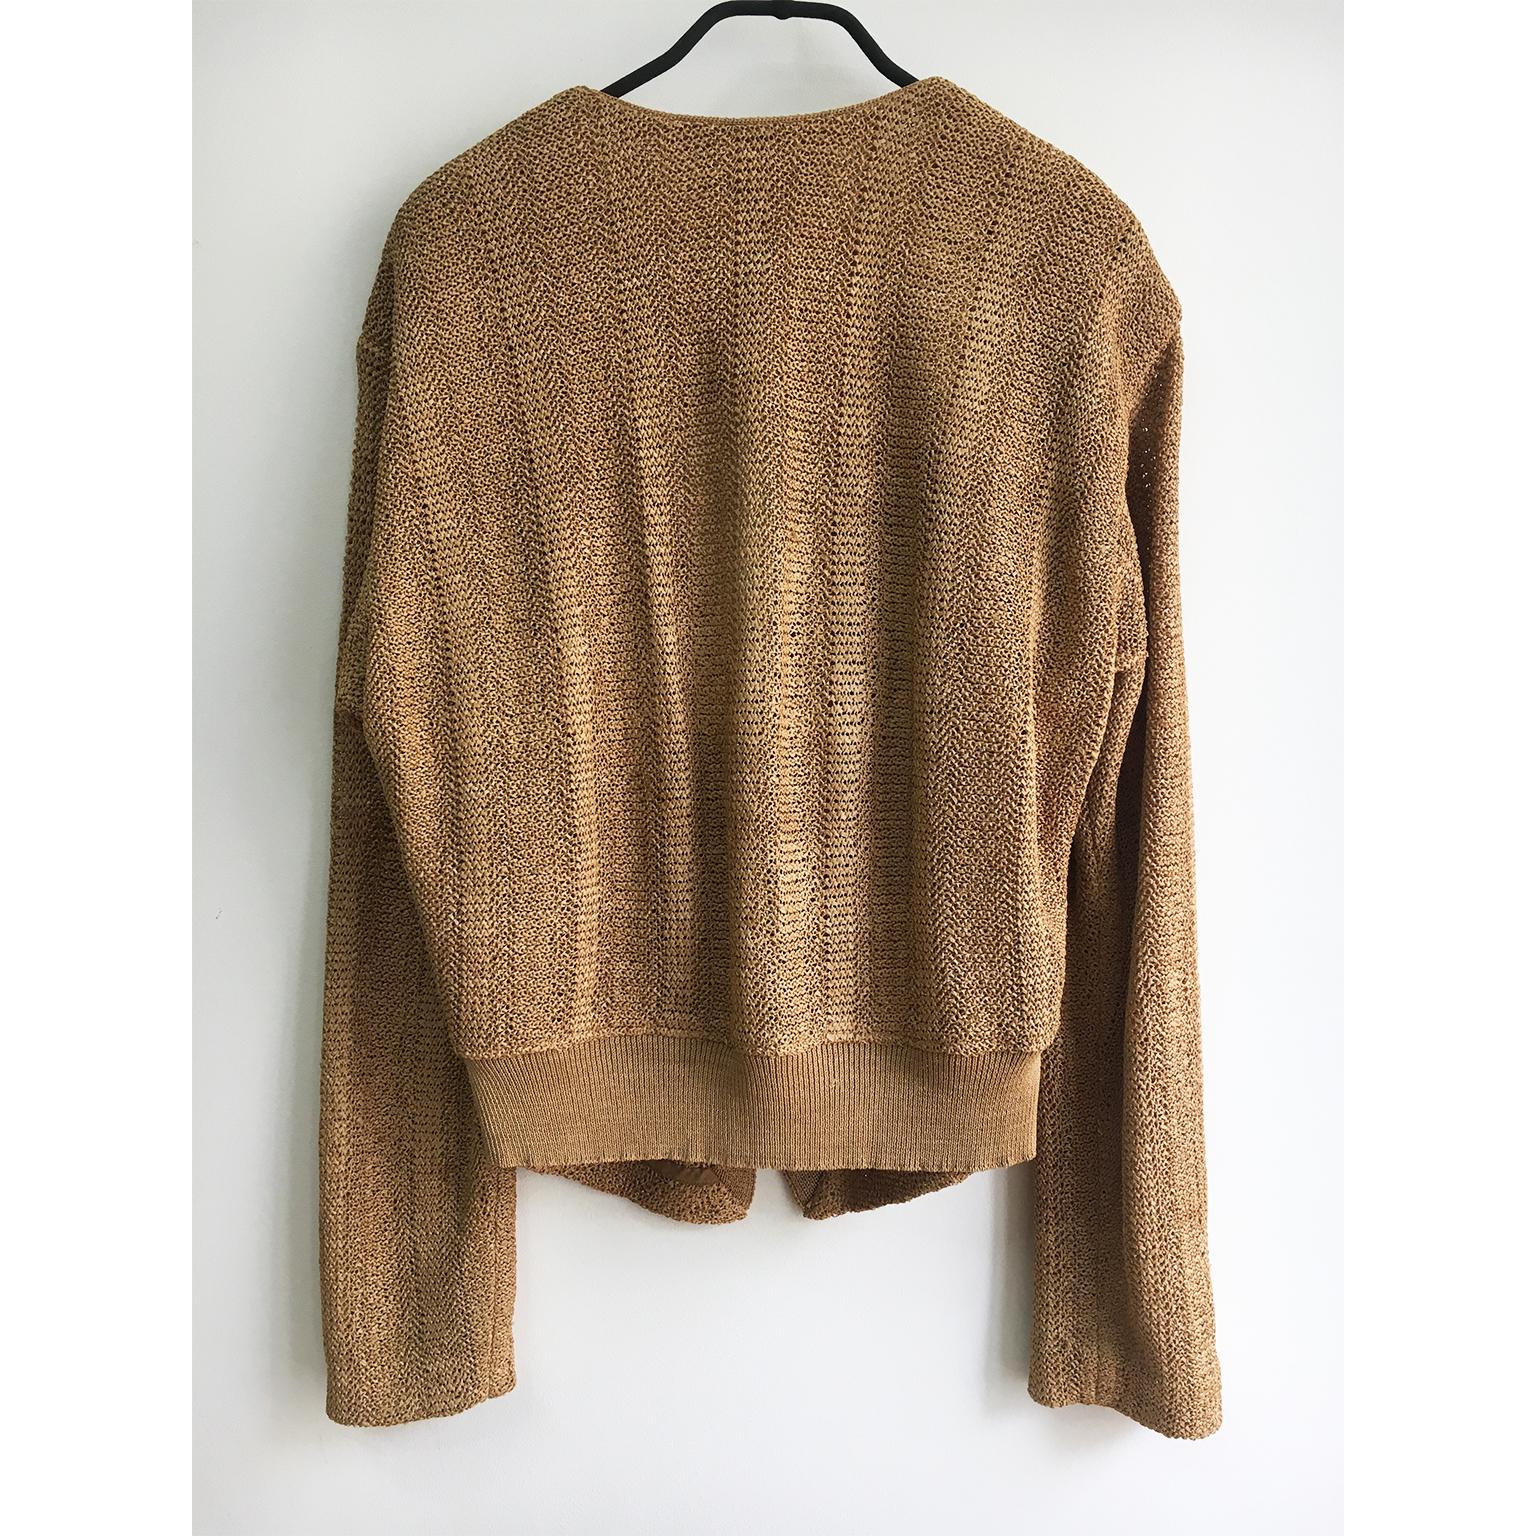 Issey Miyake Tan Straw Knit Beige Cardigan early 90s In Good Condition For Sale In Berlin, DE